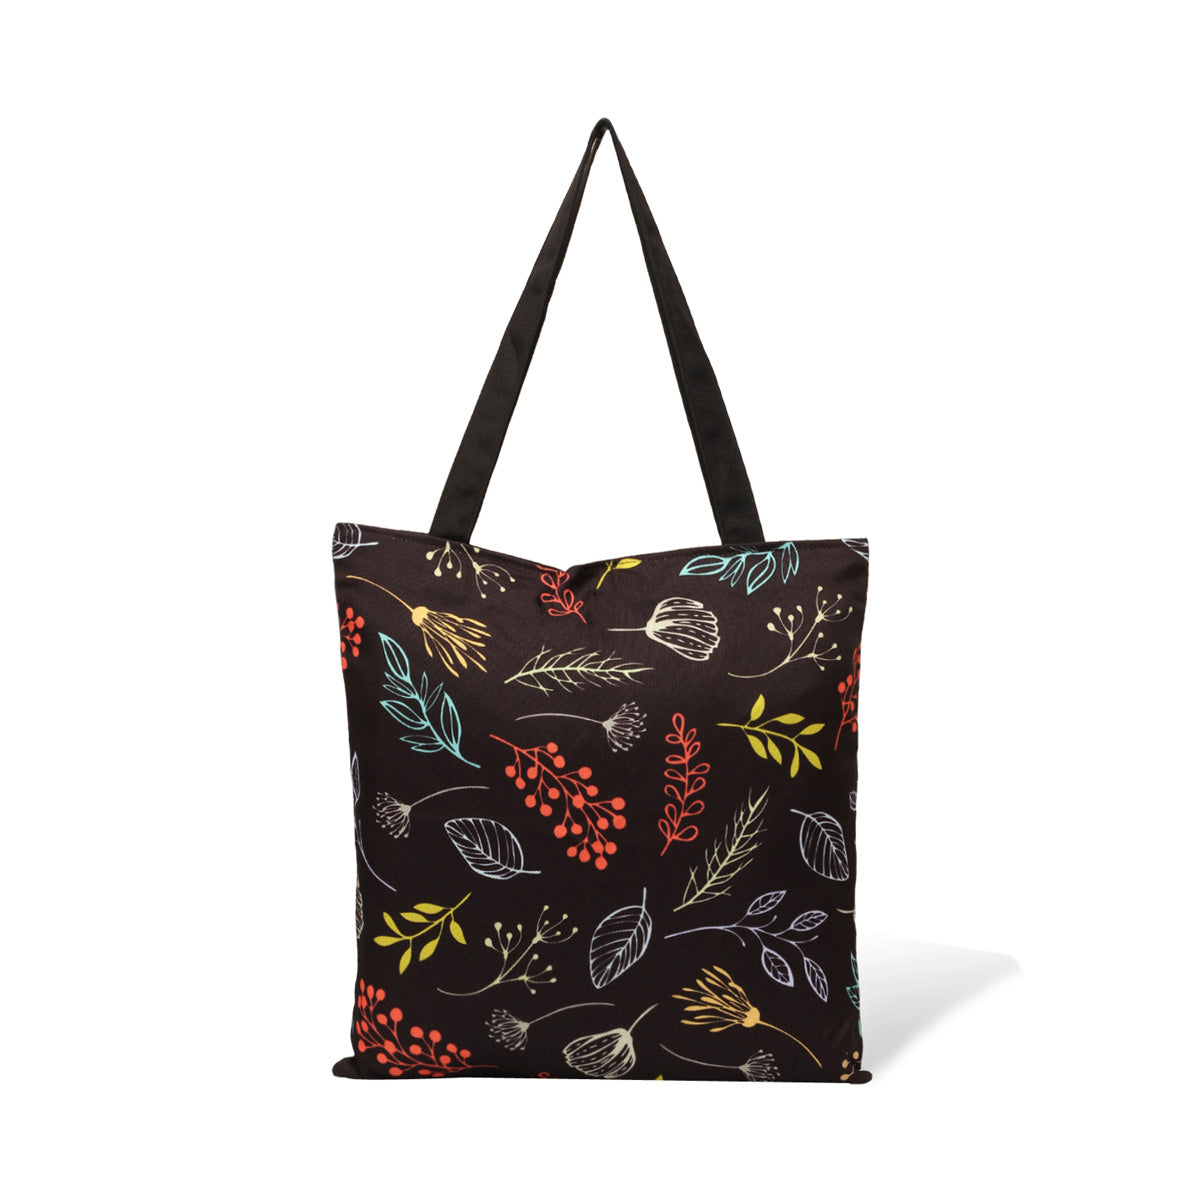 Vibrant leaves and flowers on a black tote bag.